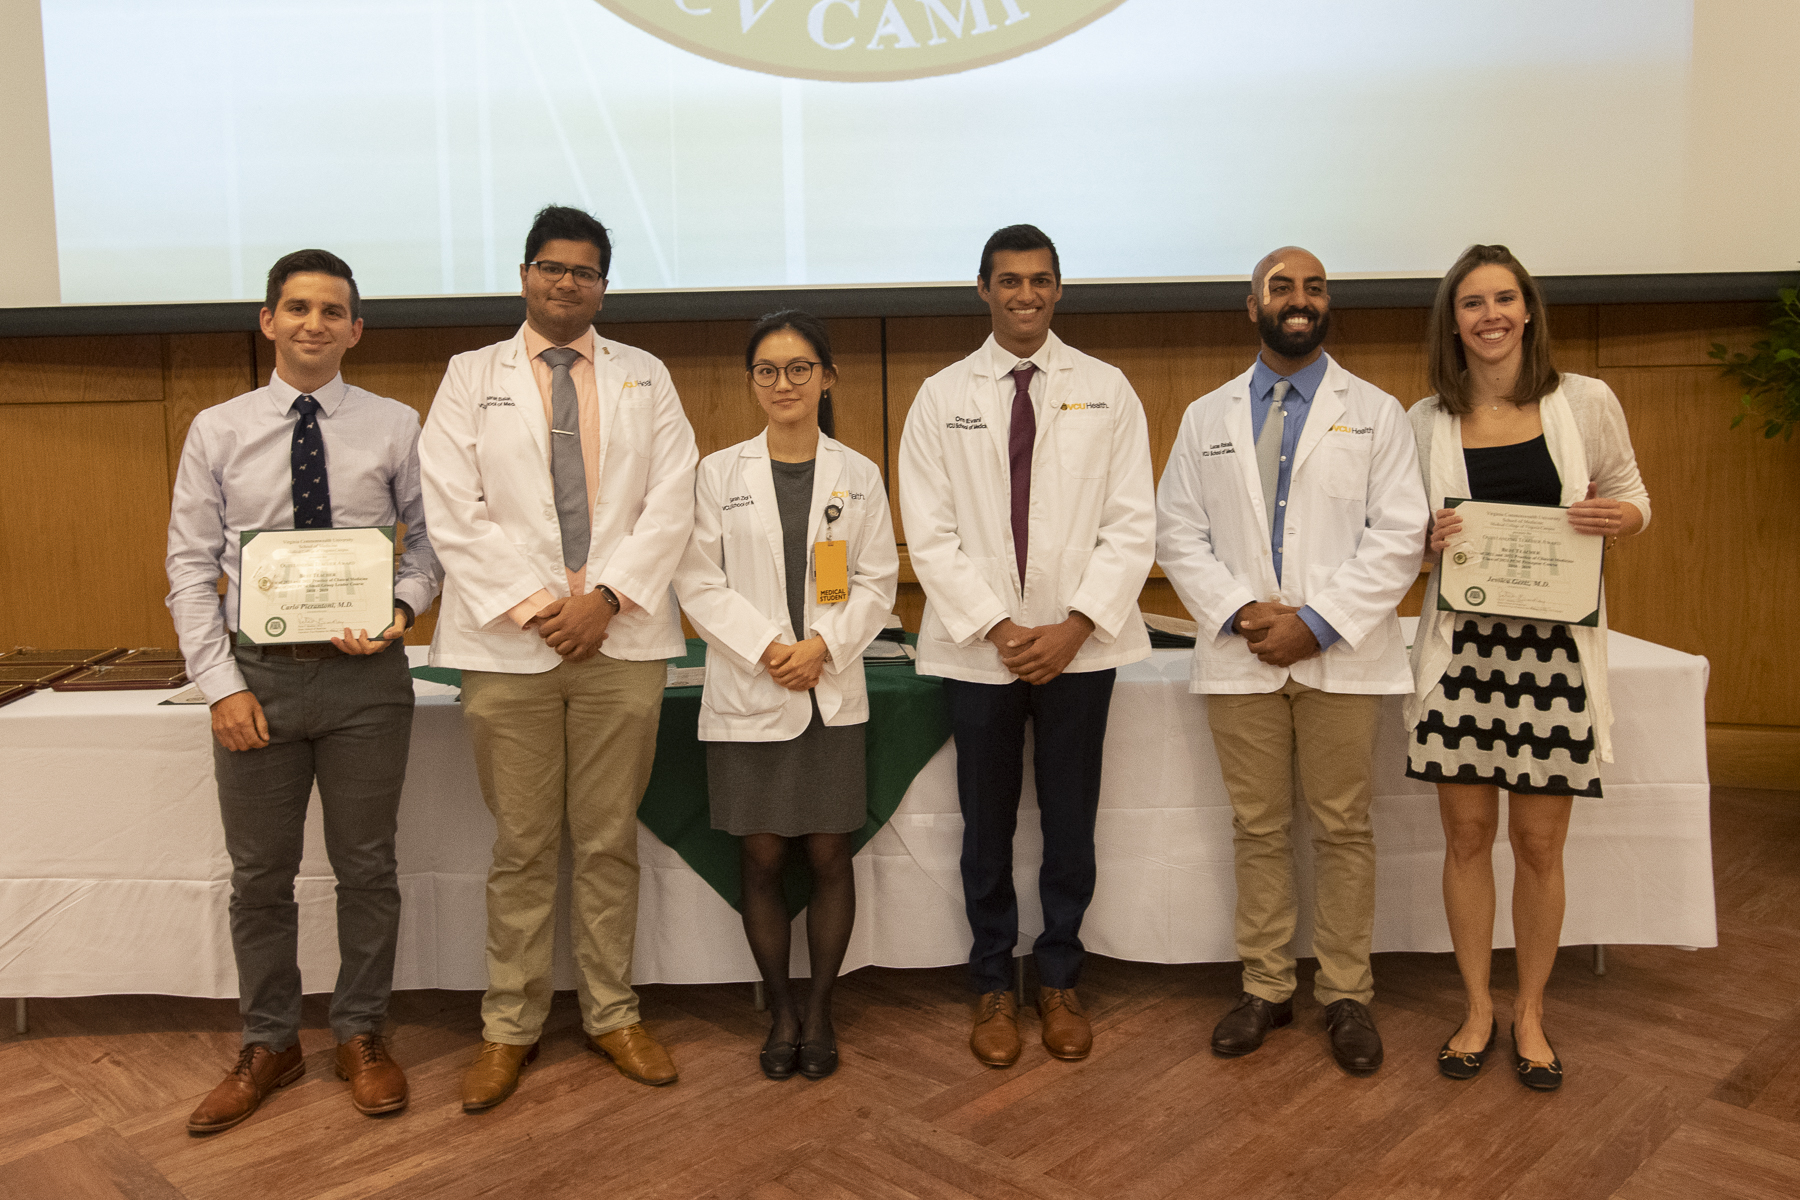  21st Annual Faculty Excellence Awards Program 2019 